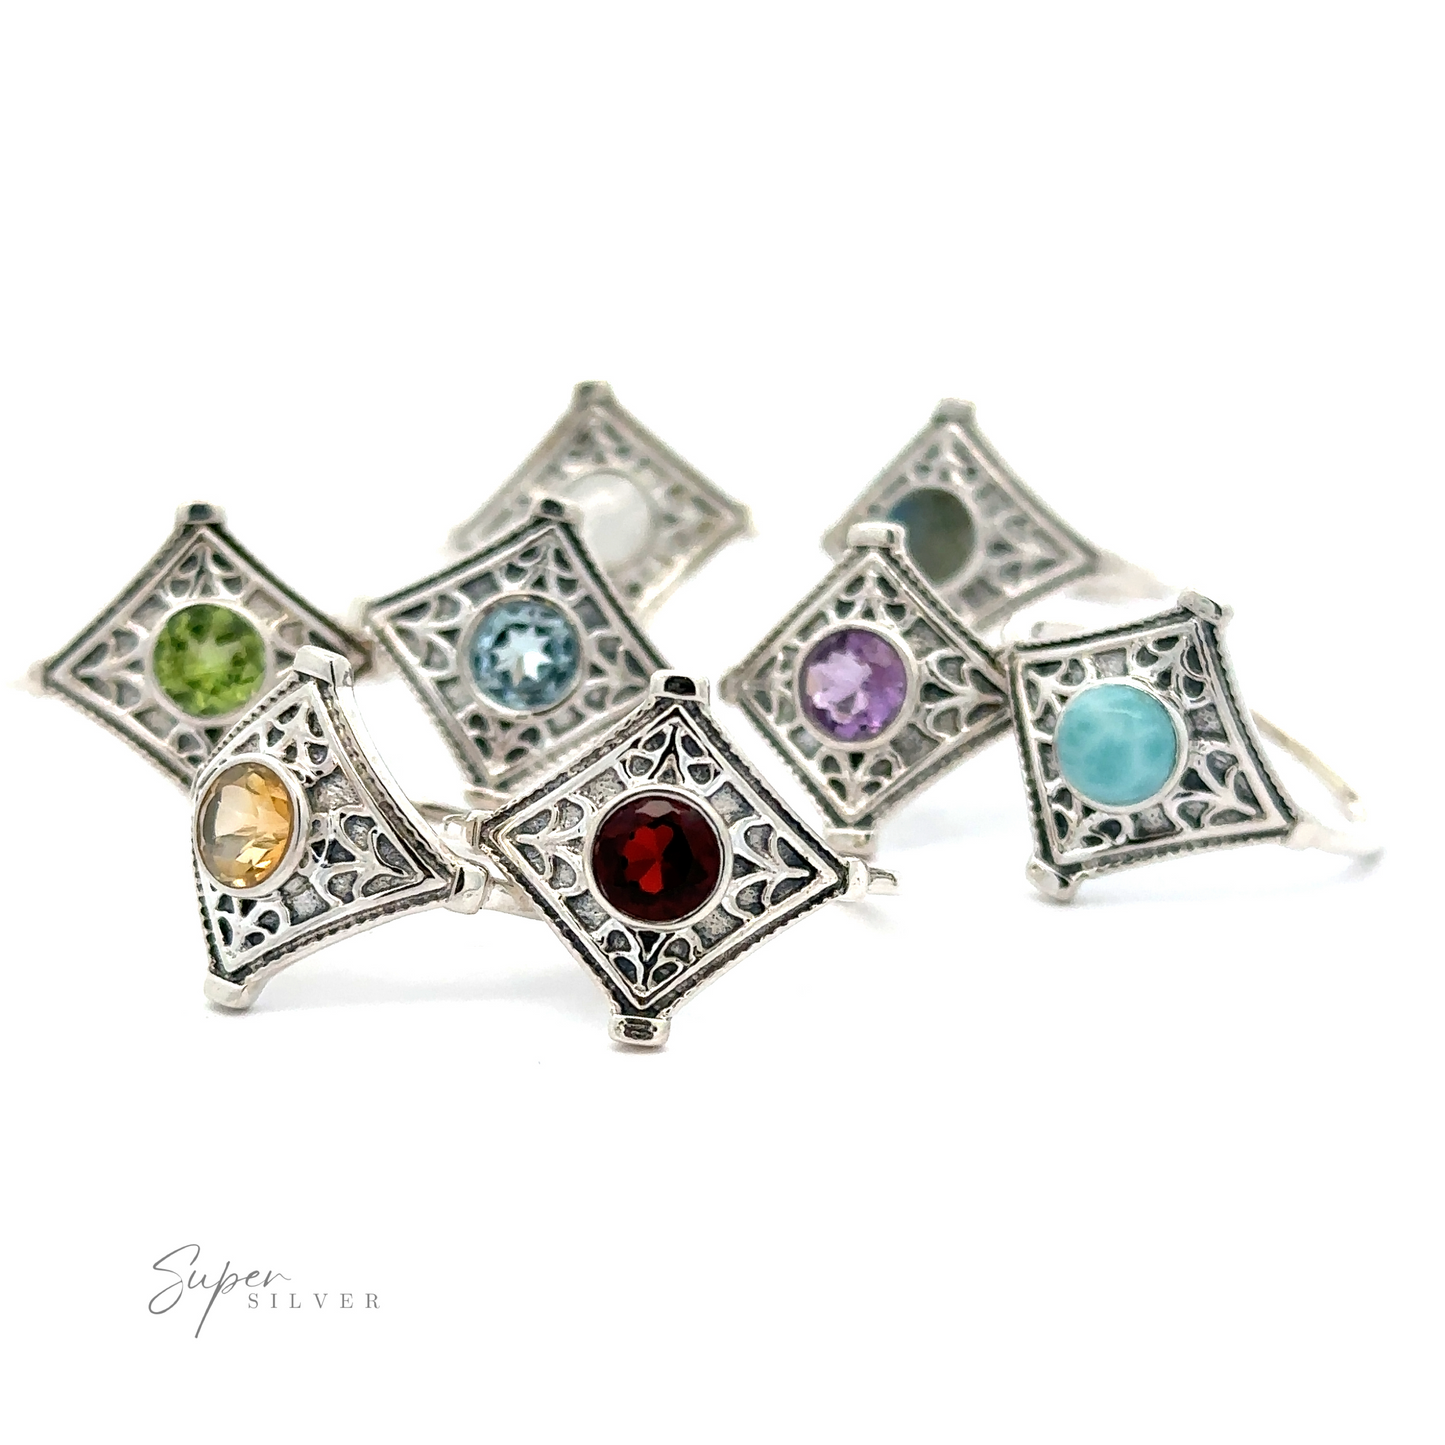 A collection of intricate diamond silver rings with round gemstones, each featuring a different colored gemstone, artistically arranged on a white background.